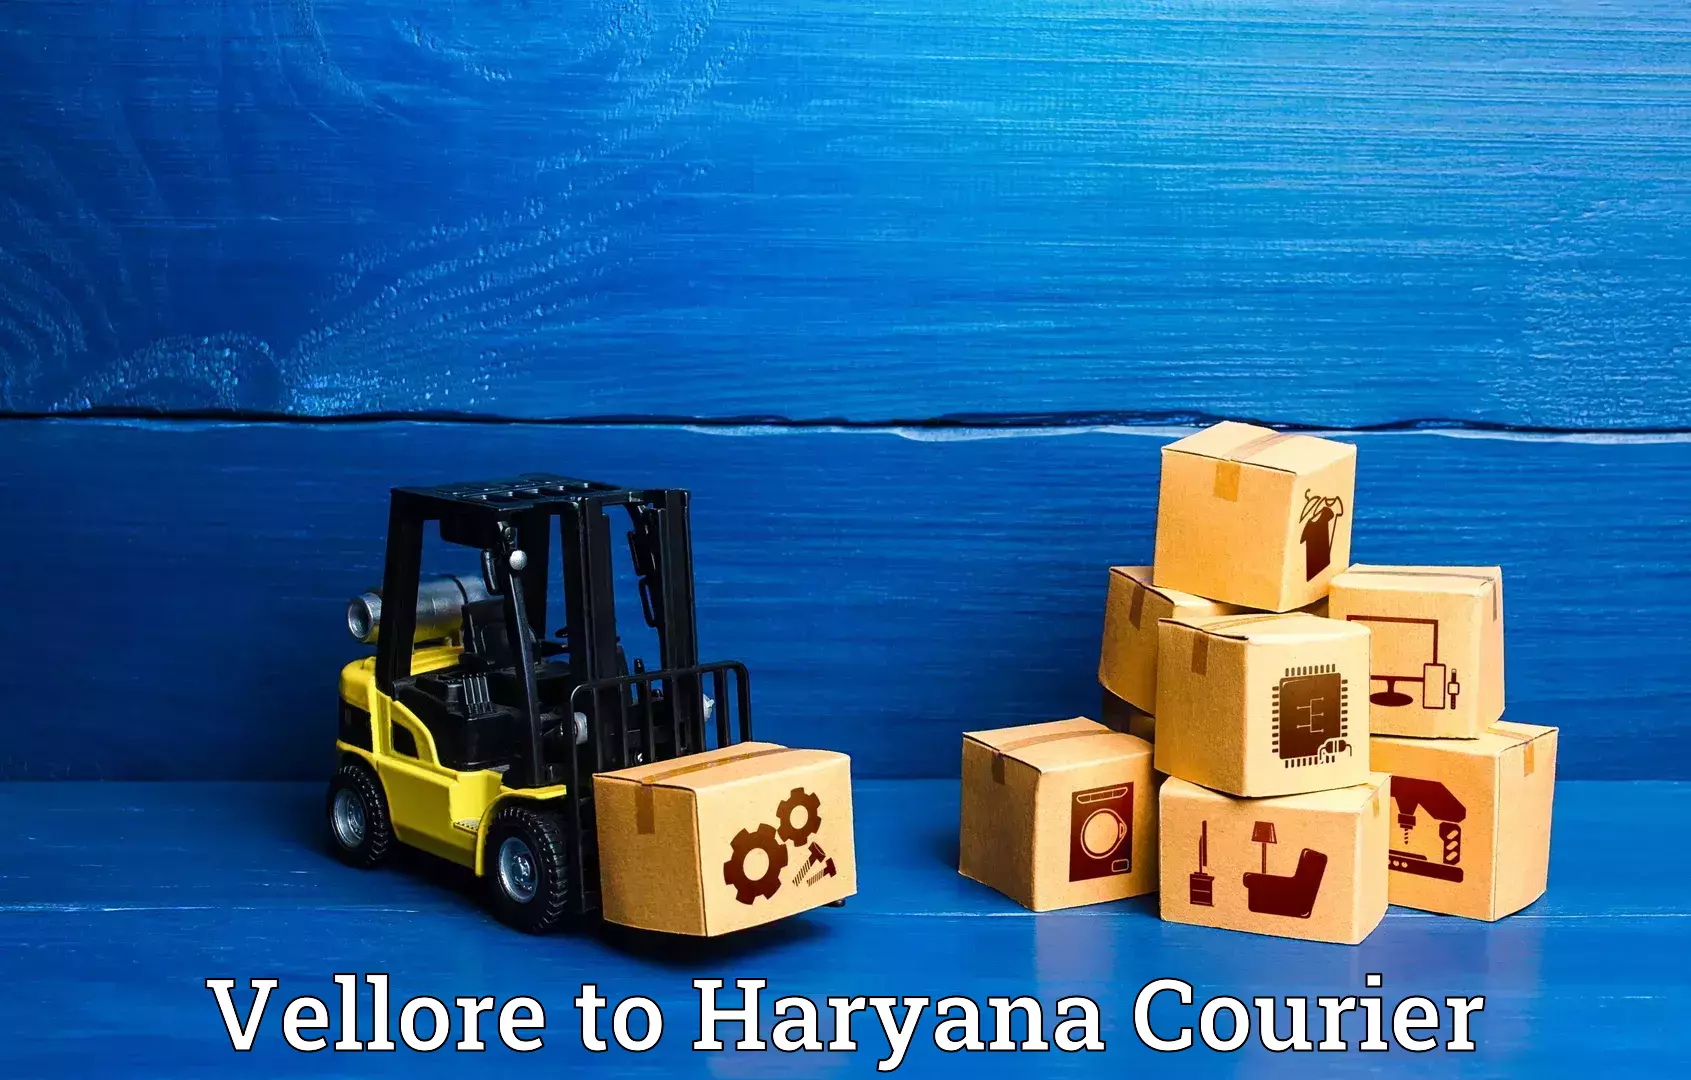 Baggage transport technology Vellore to Haryana